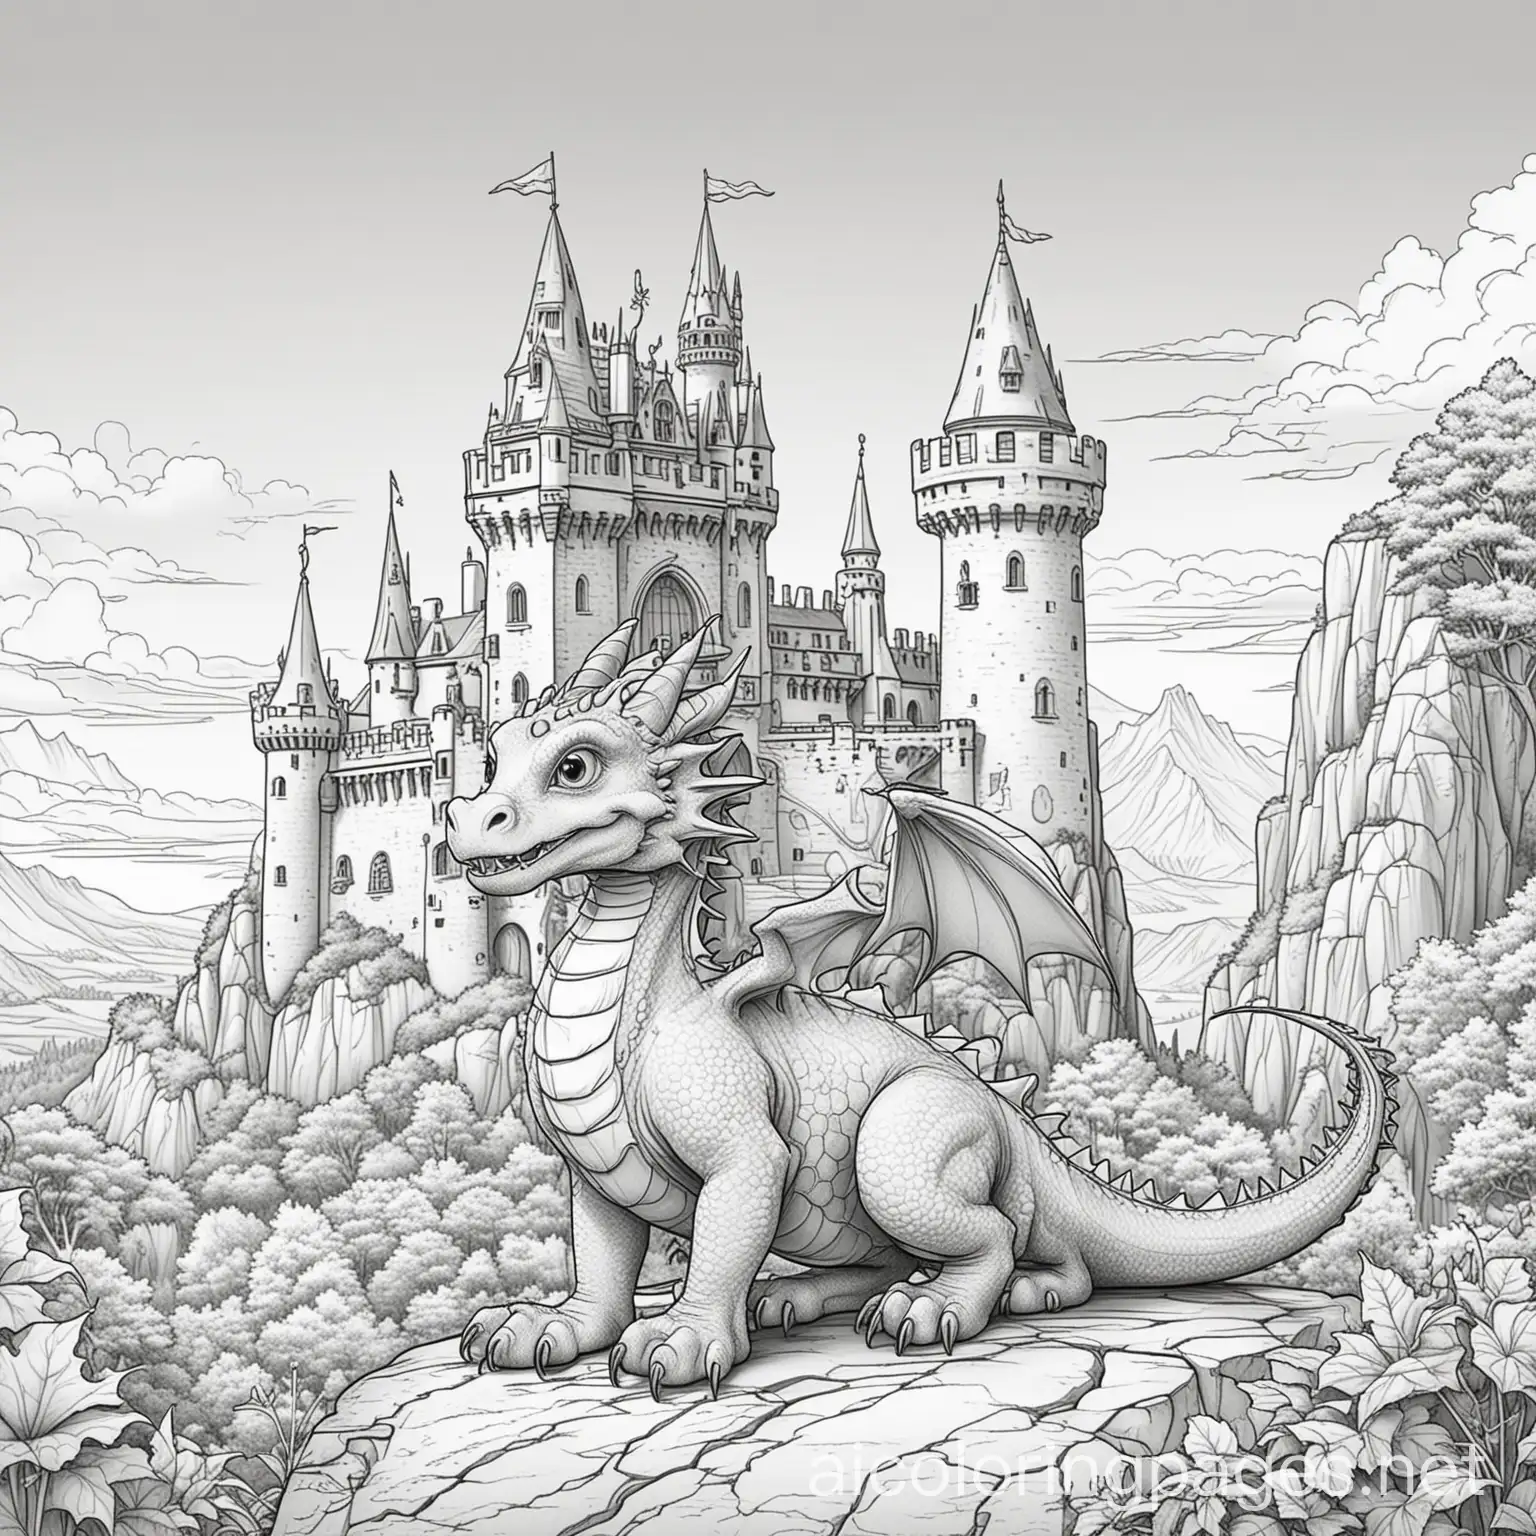 A cute friendly dragon in front of a castle, Coloring Page, black and white, line art, white background, Simplicity, Ample White Space. The background of the coloring page is plain white to make it easy for young children to color within the lines. The outlines of all the subjects are easy to distinguish, making it simple for kids to color without too much difficulty